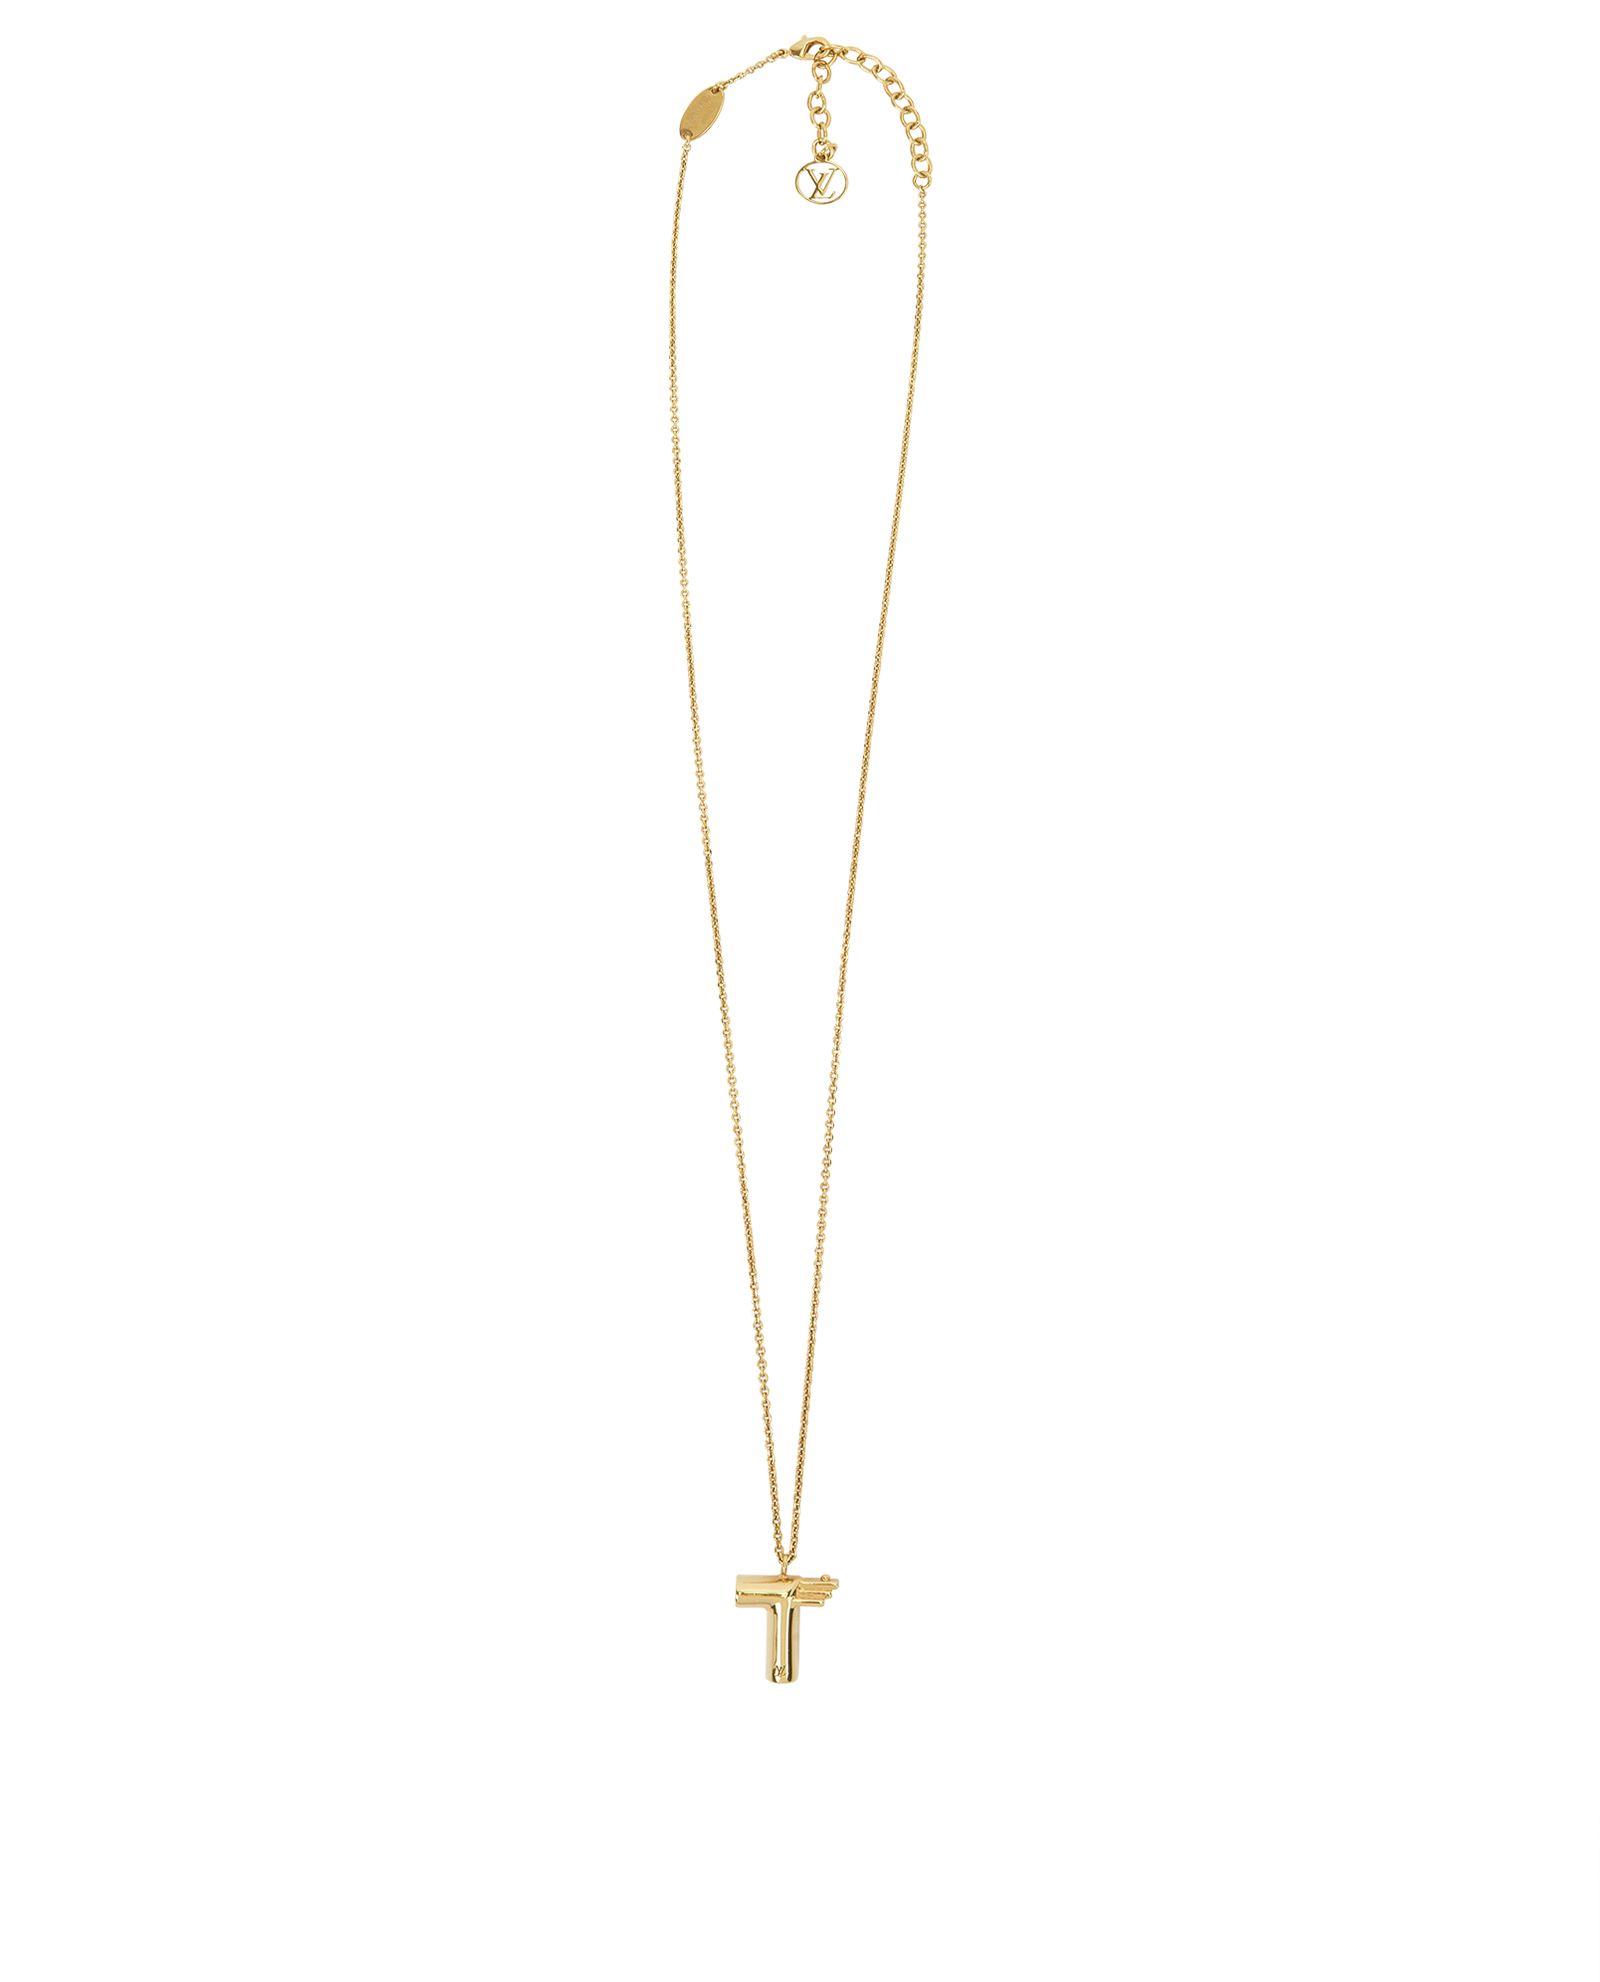 It's_brandname - New LV Squared Gold Necklace Limited by